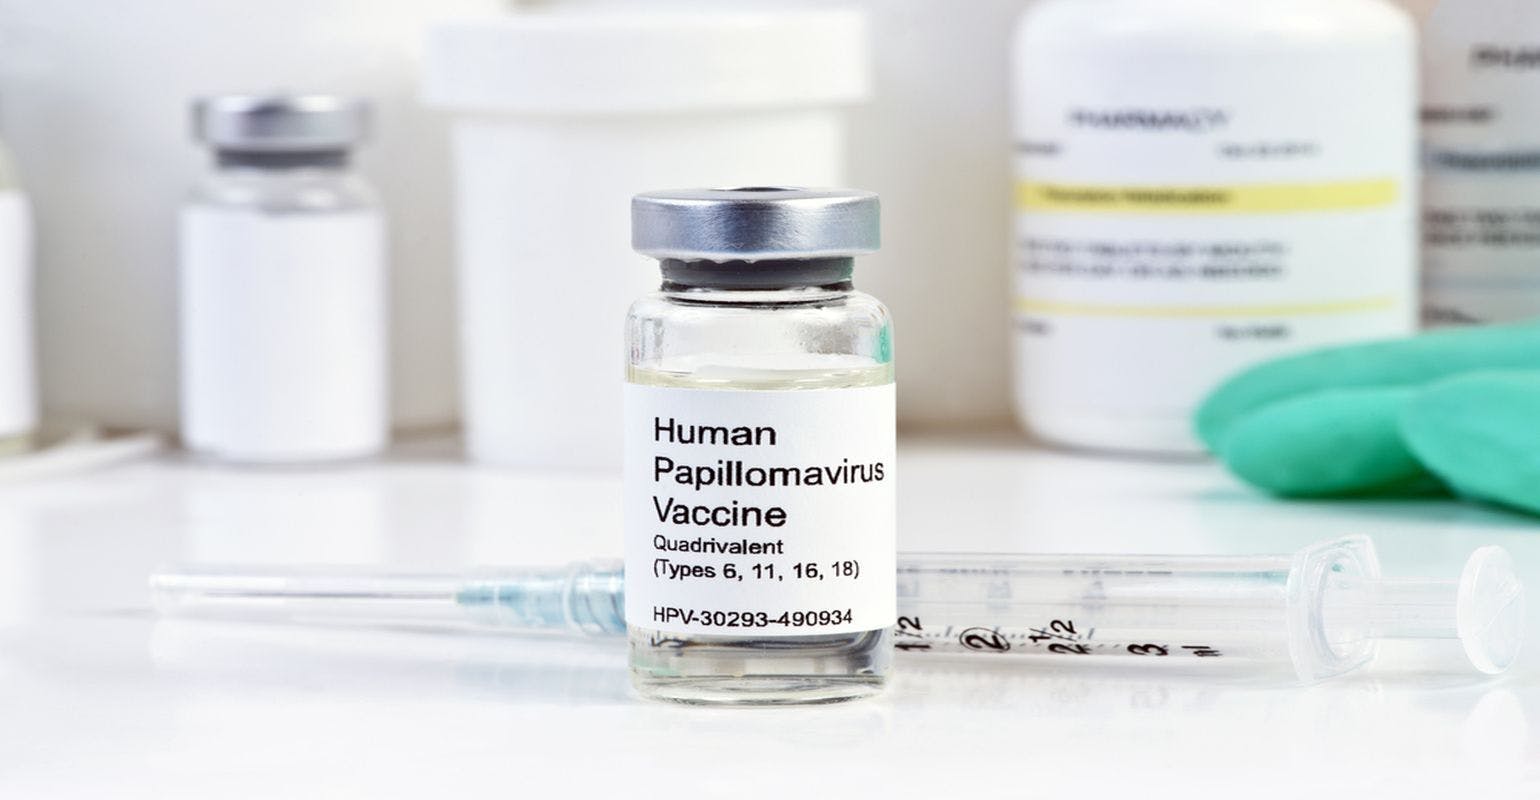 Public Perception of Scientific Uncertainty Linked to HPV Vaccine Policy Support